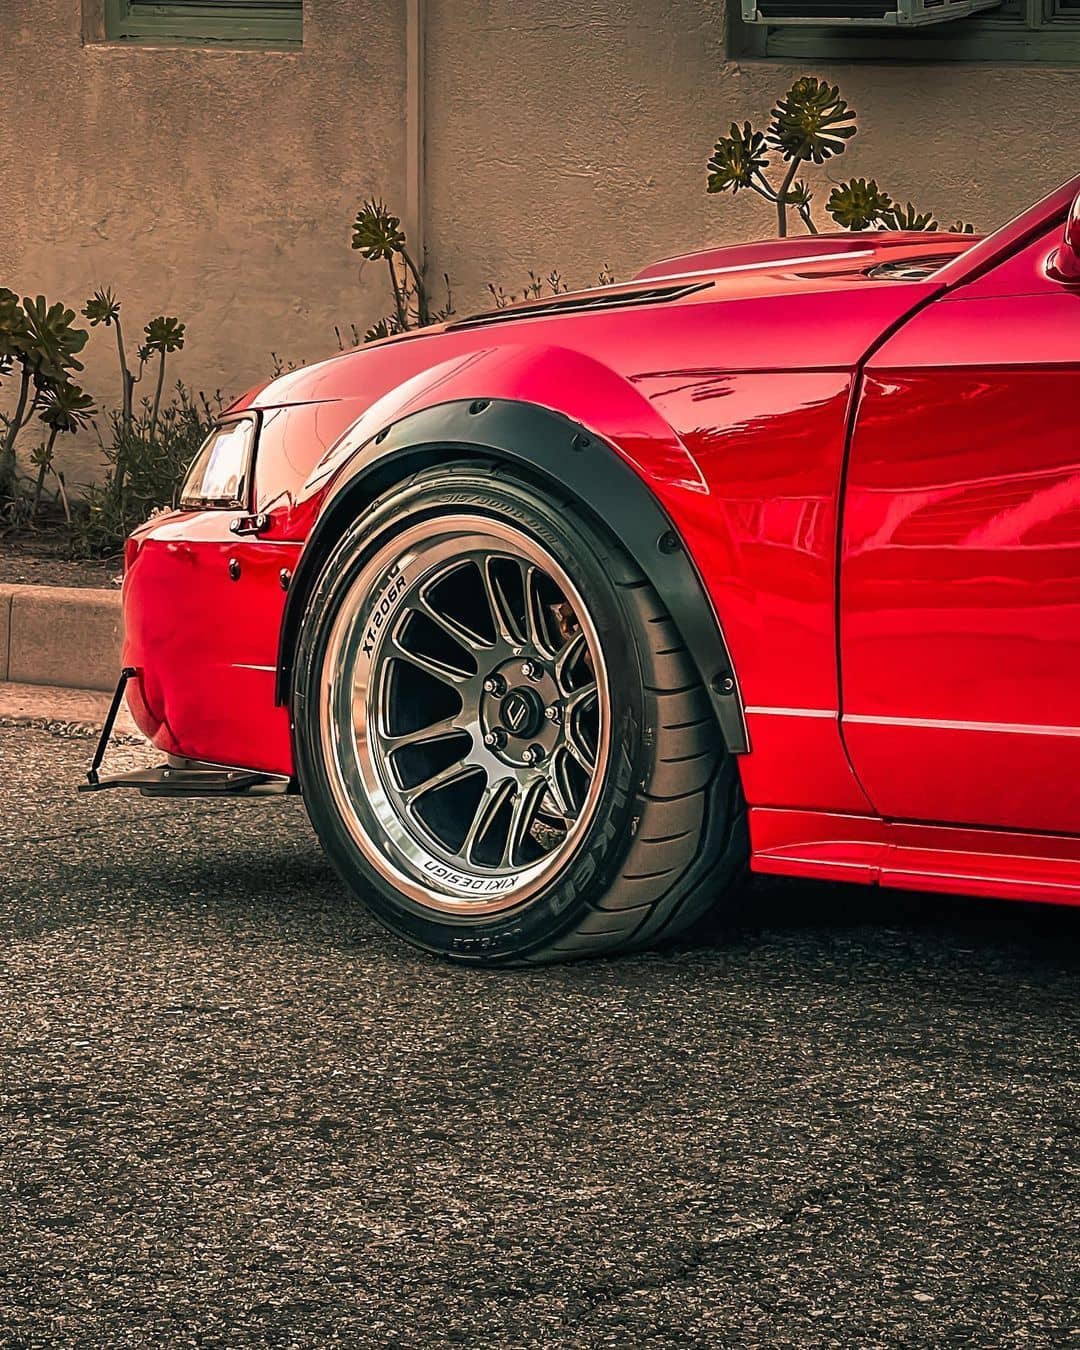 widest 315/30R18 tires on the front wheels of a New Edge Mustang